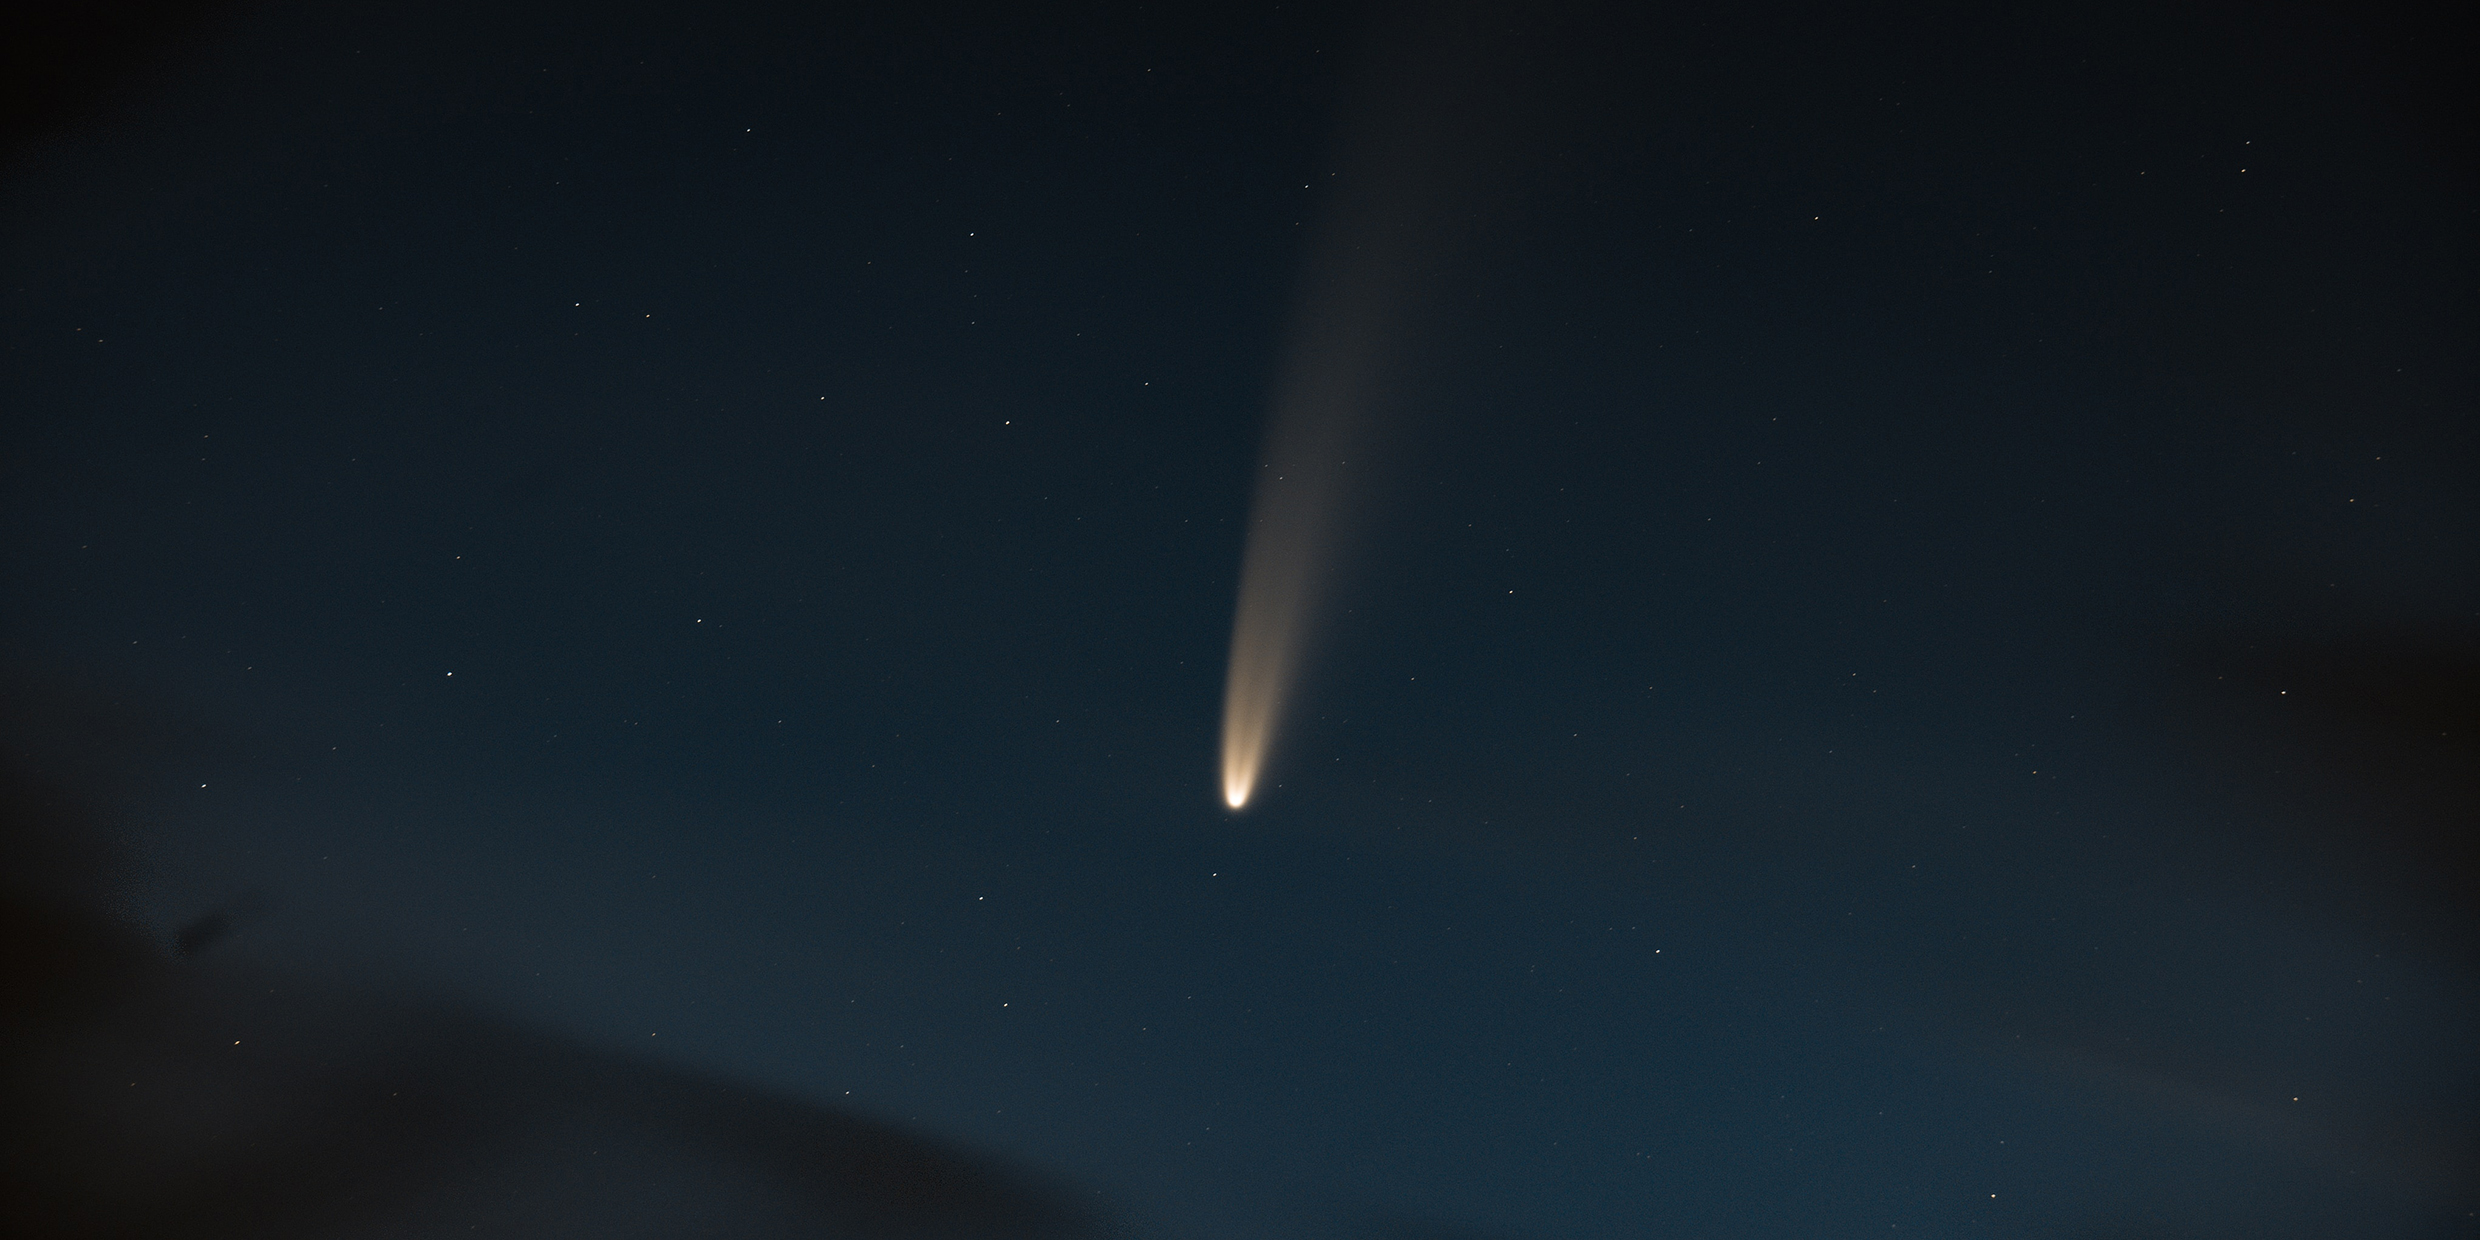 Image of a comet glowing in the night sky